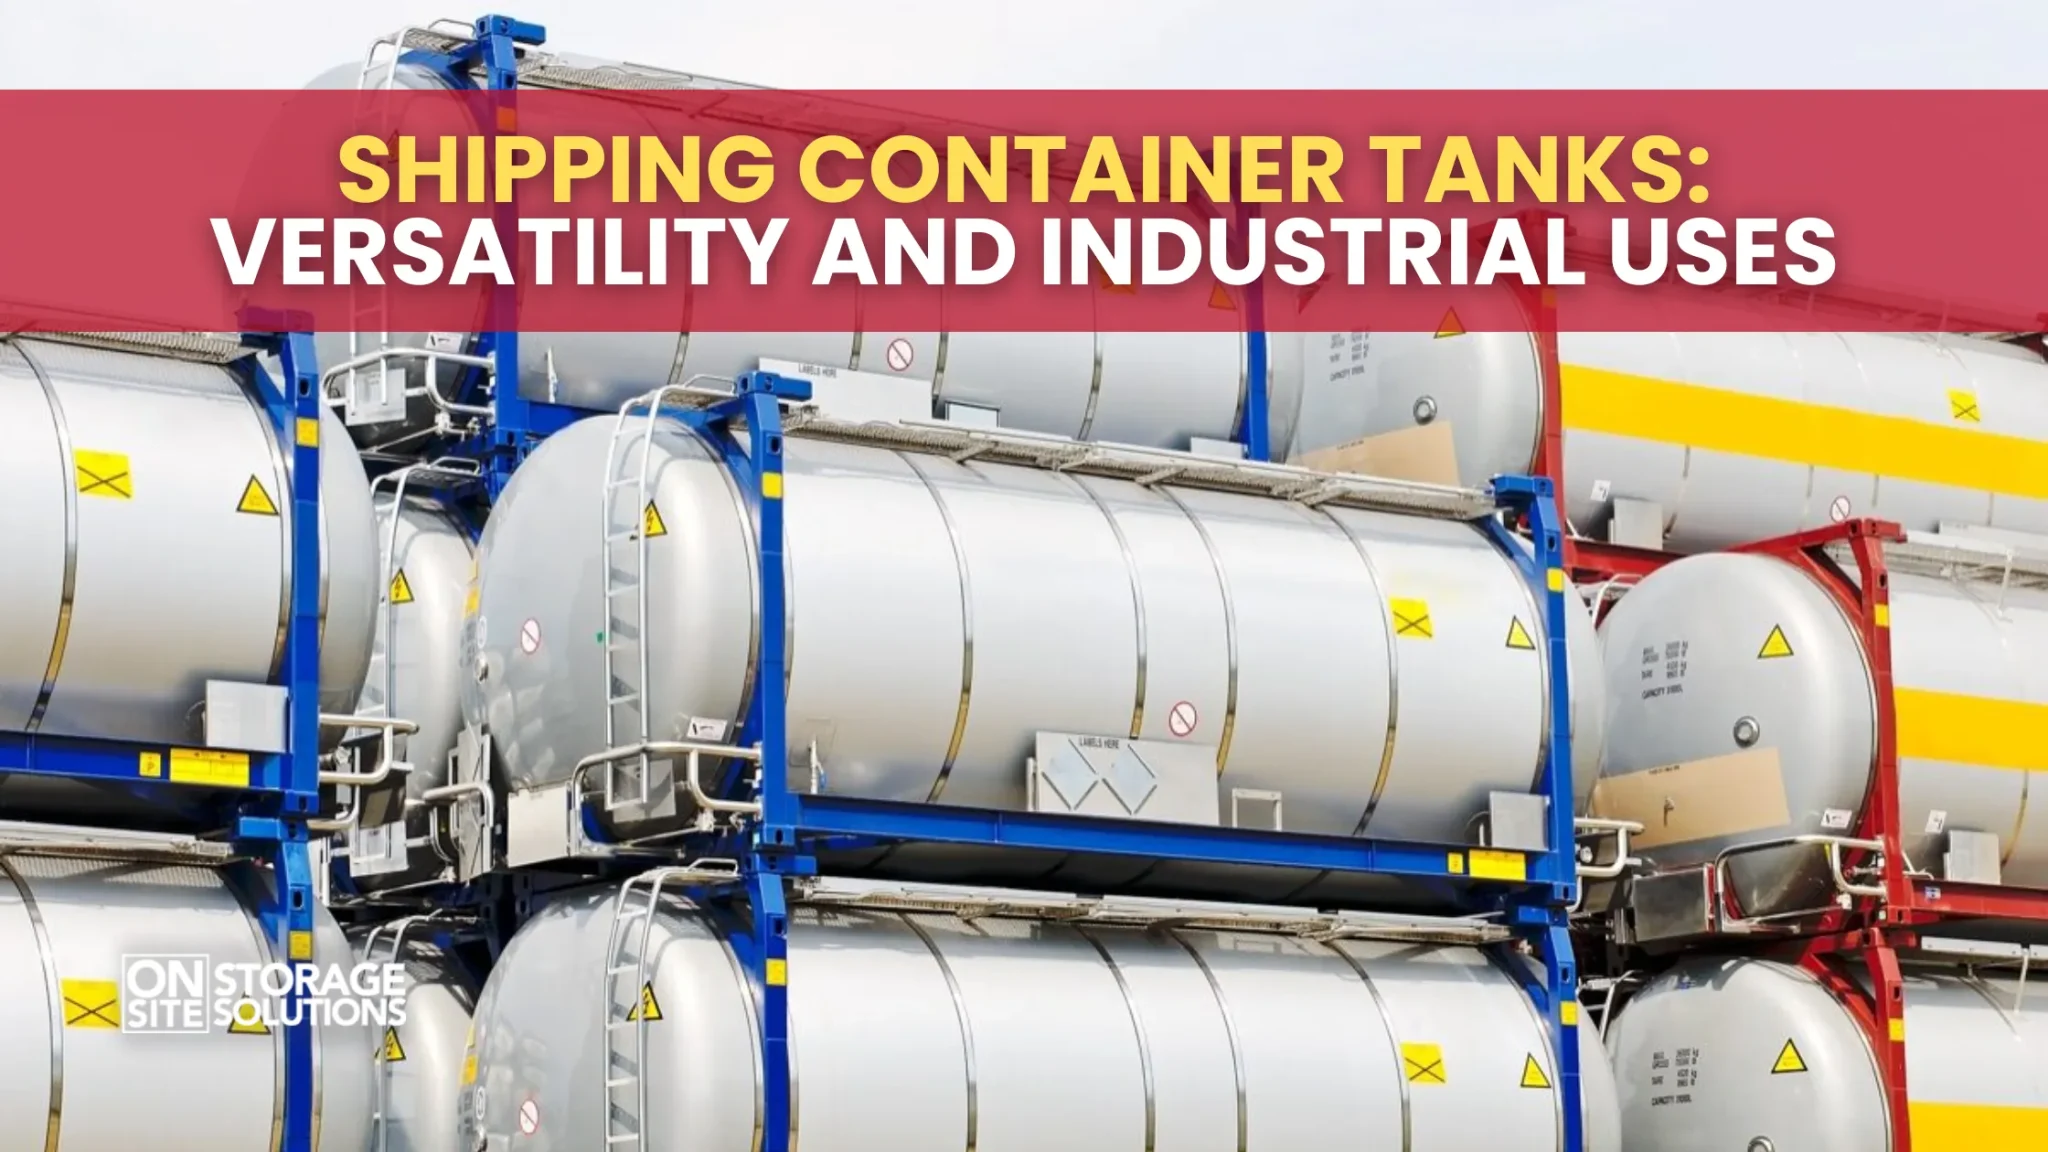 Shipping Container Tanks: Versatility and Industrial Uses